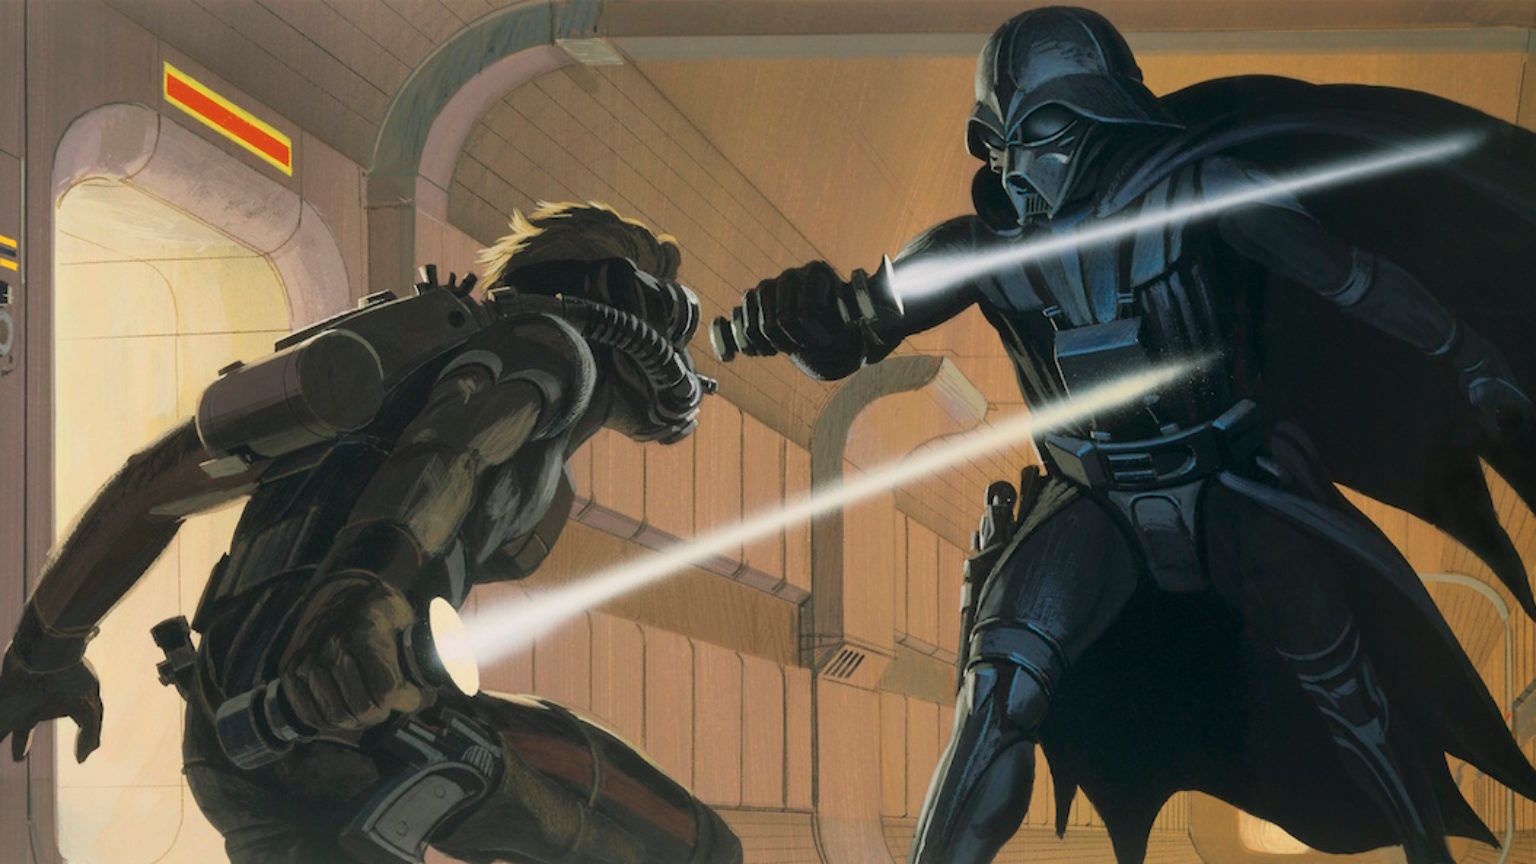 Concept art by Ralph Mcquarrie shows Darth Vader duelling with an early version of Luke Skywalker